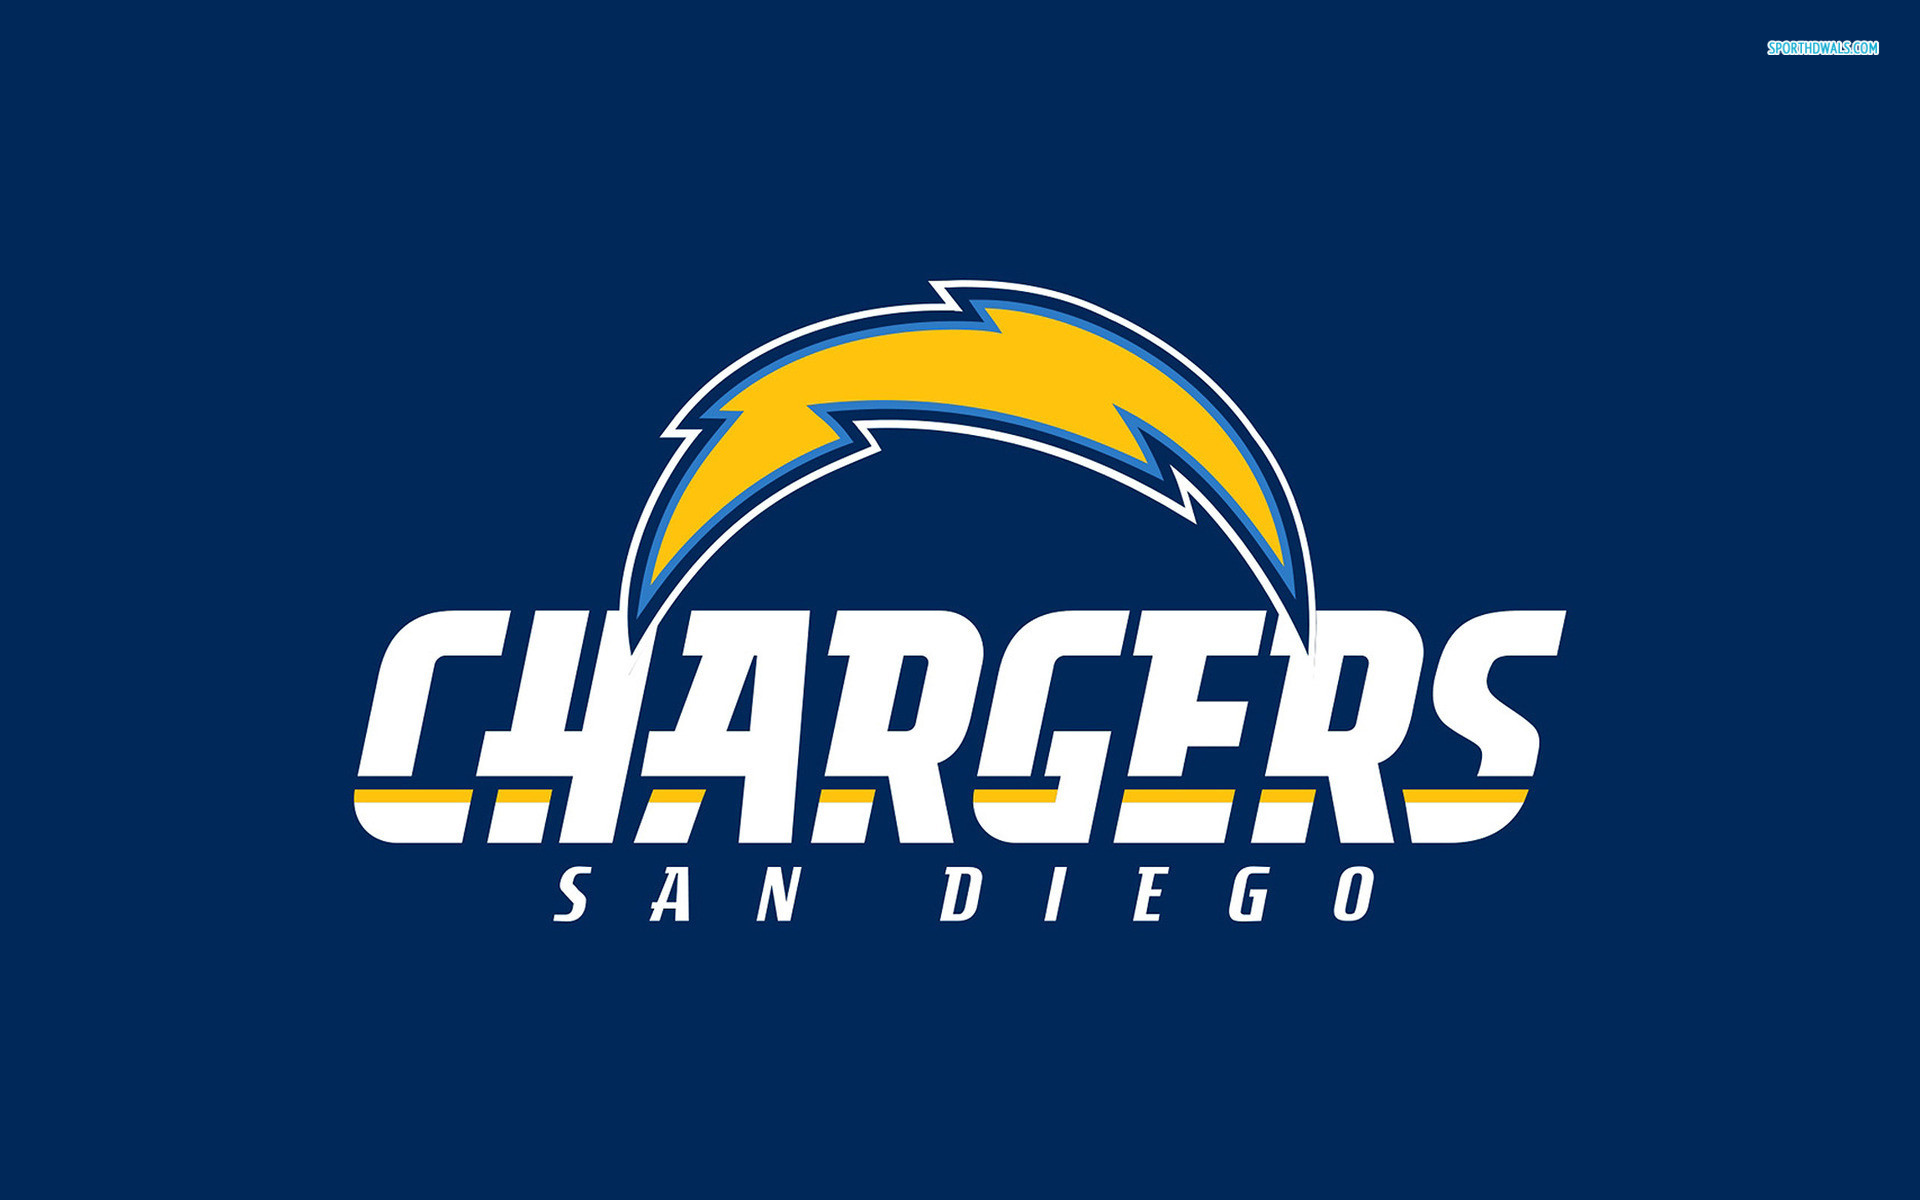 San Diego Chargers Official NFL Football Team Logo x Flag – Wincraft Inc.